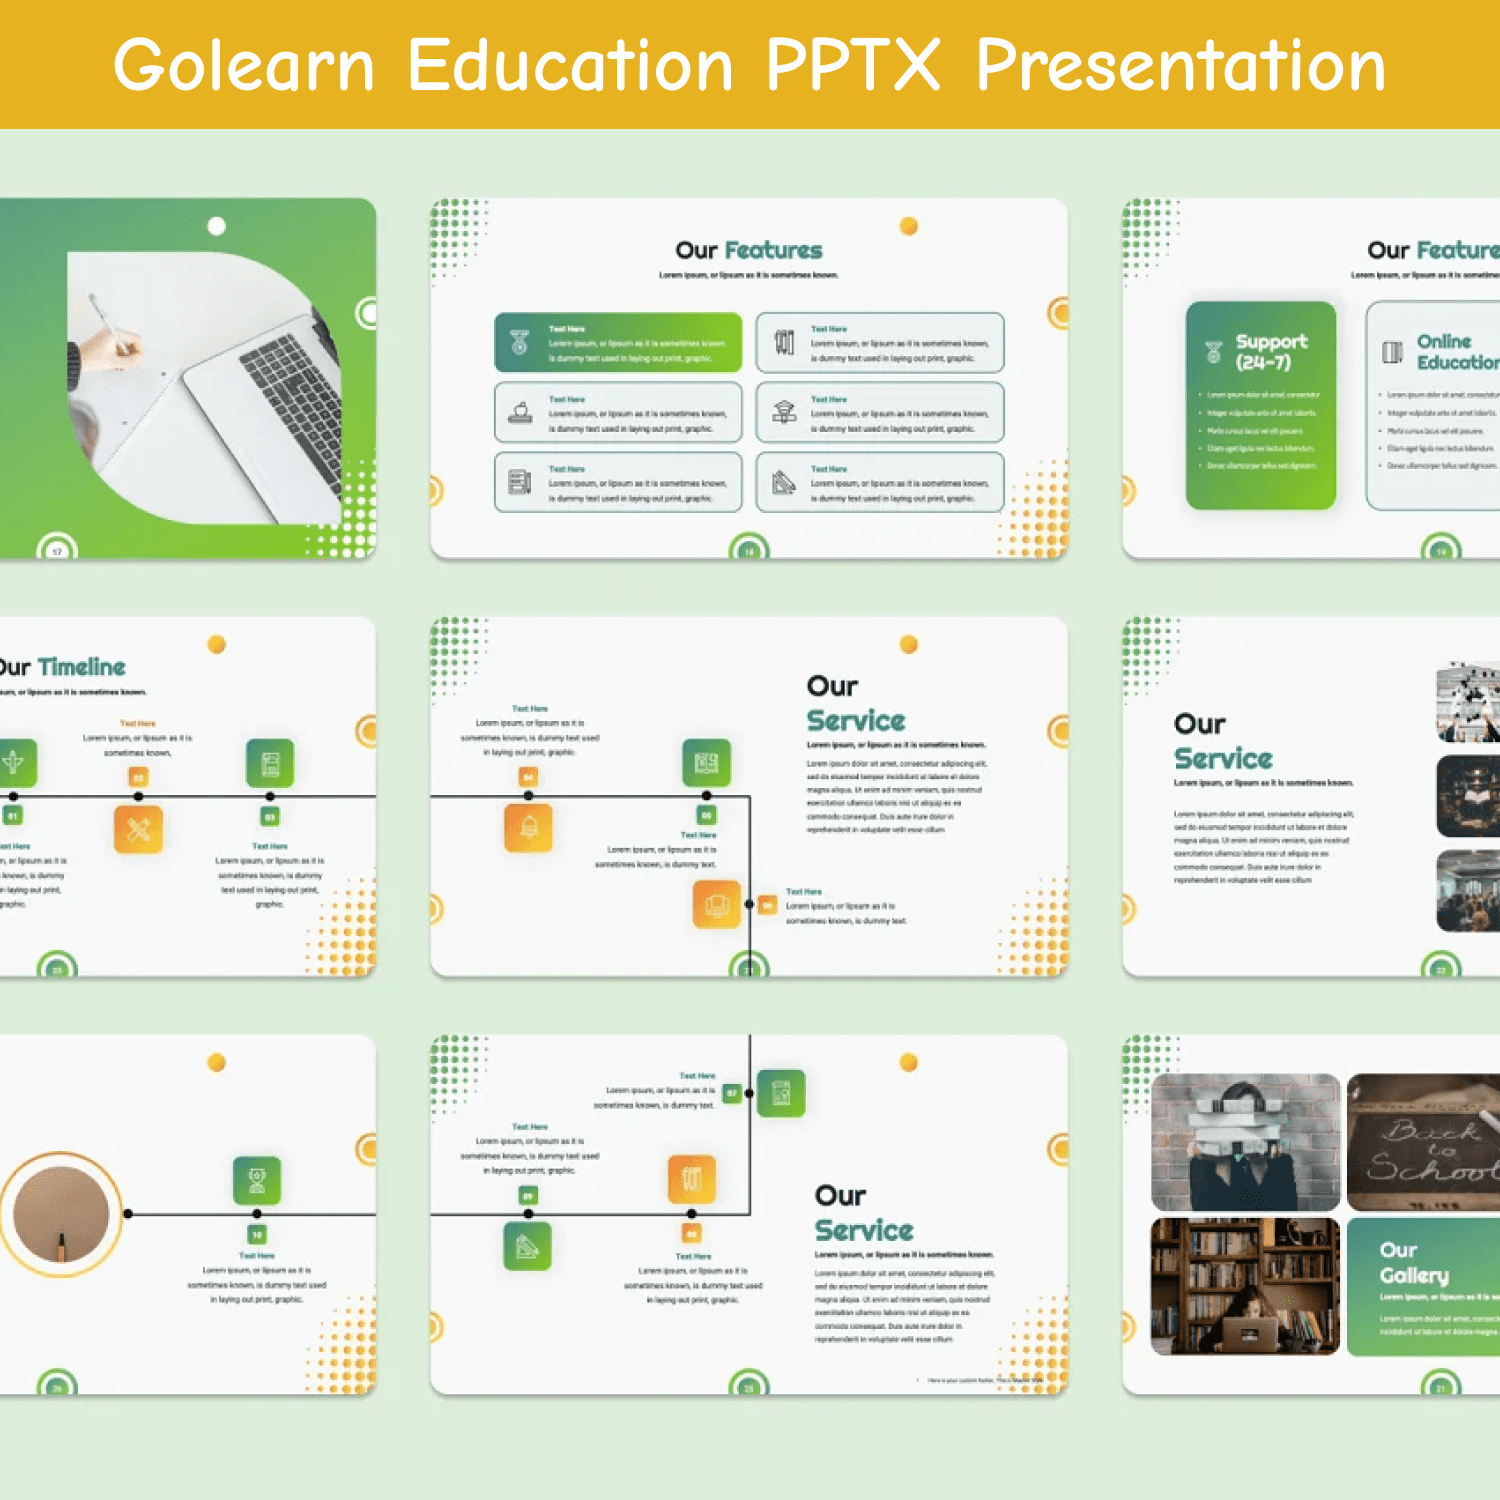 golearn education pptx presentation cover image.